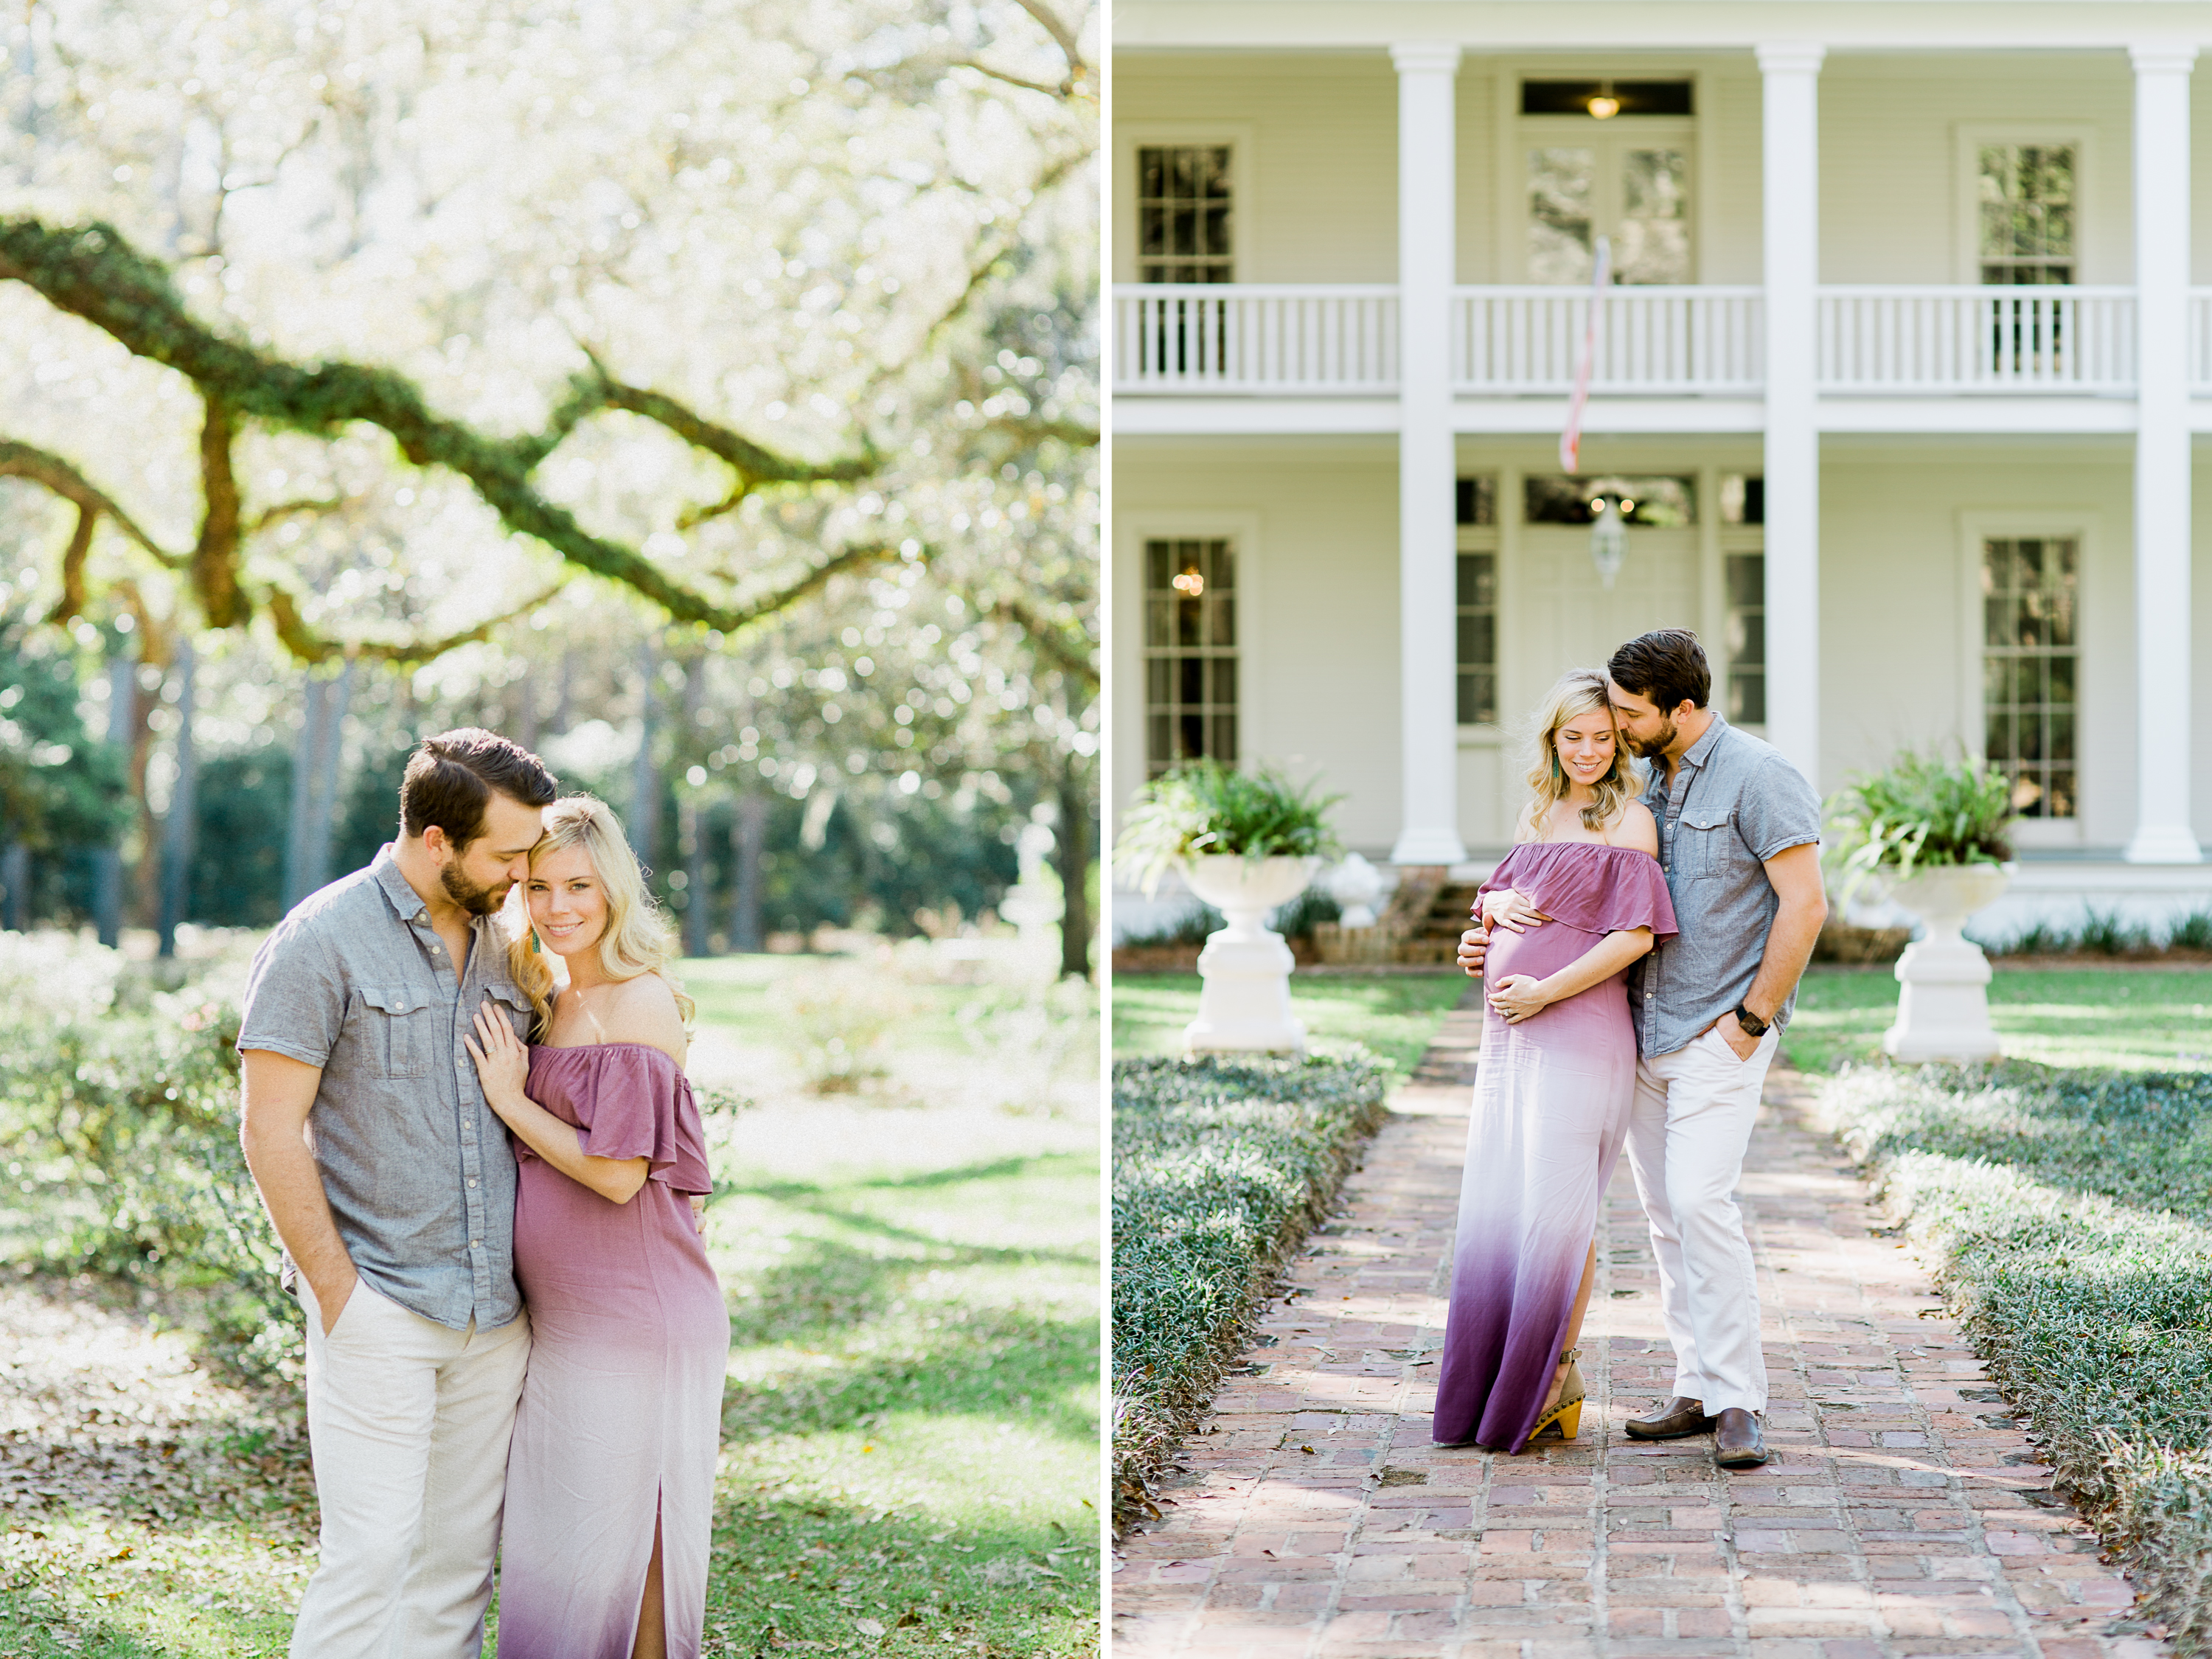 beautiful maternity session at Eden Gardens State Park